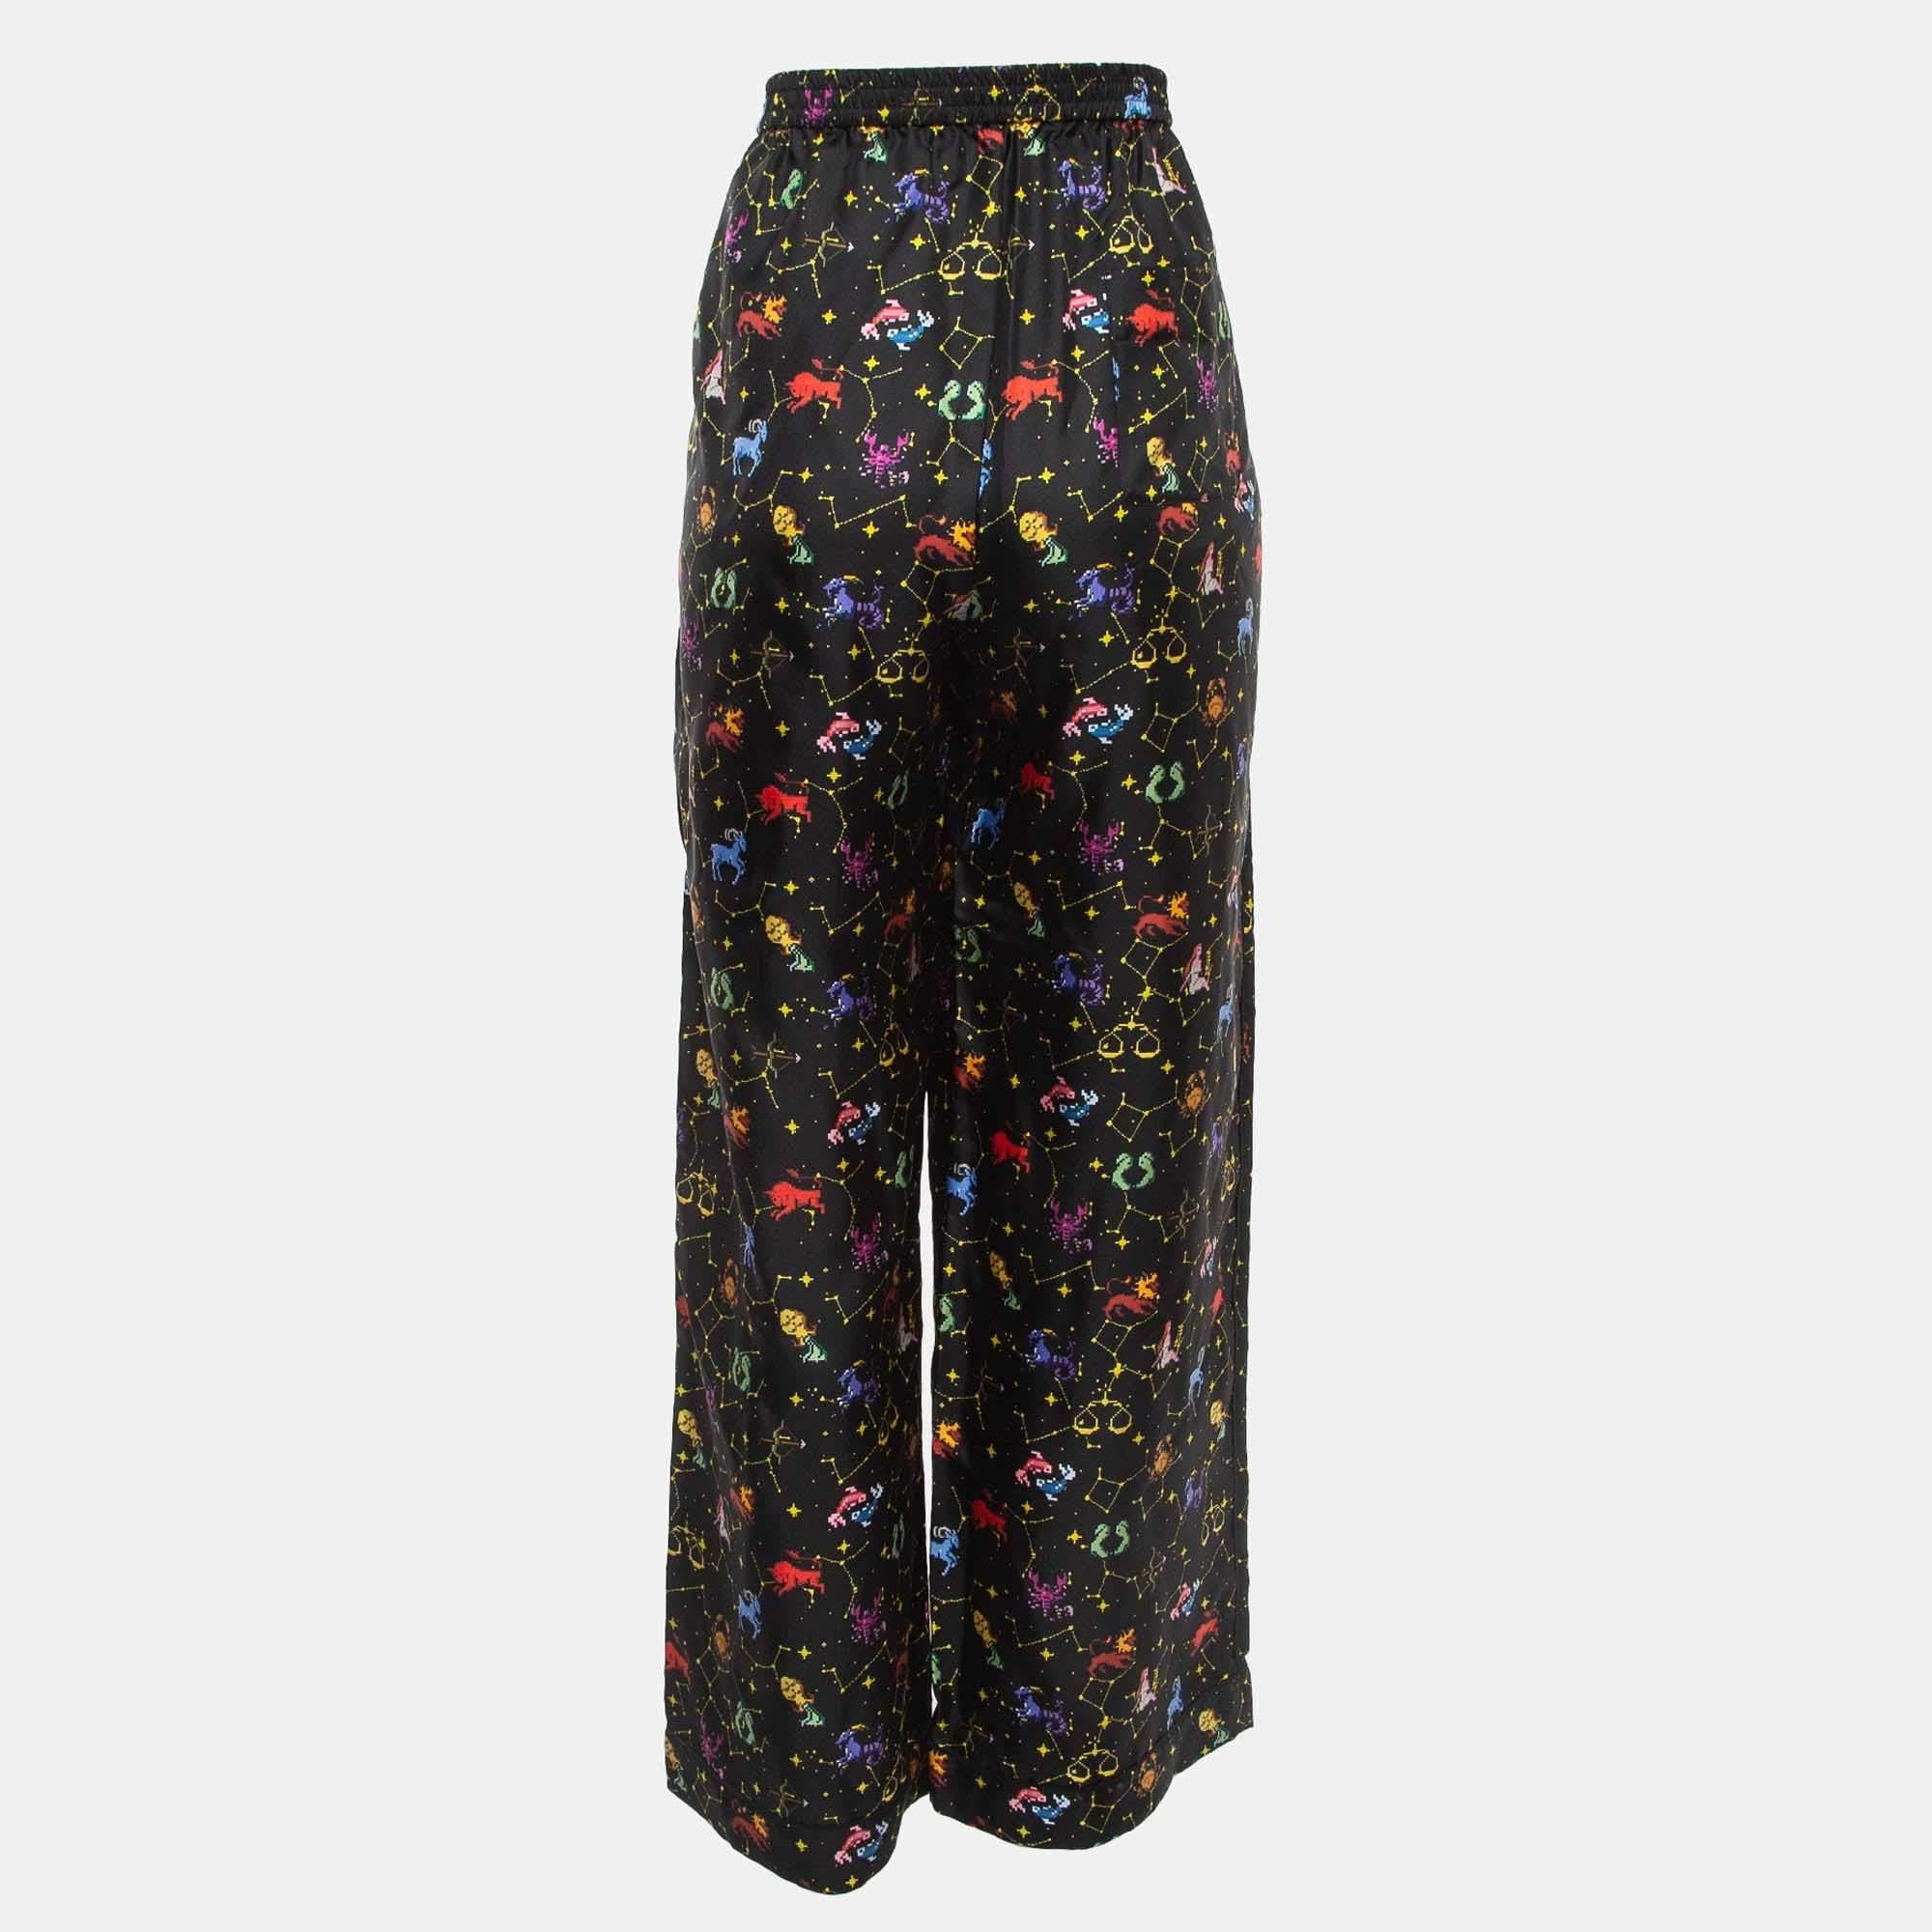 Impeccably tailored pants are a staple in a well-curated wardrobe. These Dior pants are finely sewn to give you the desired look and all-day comfort.

Includes: Original Box, Original Shopping Bag, Brand Tag